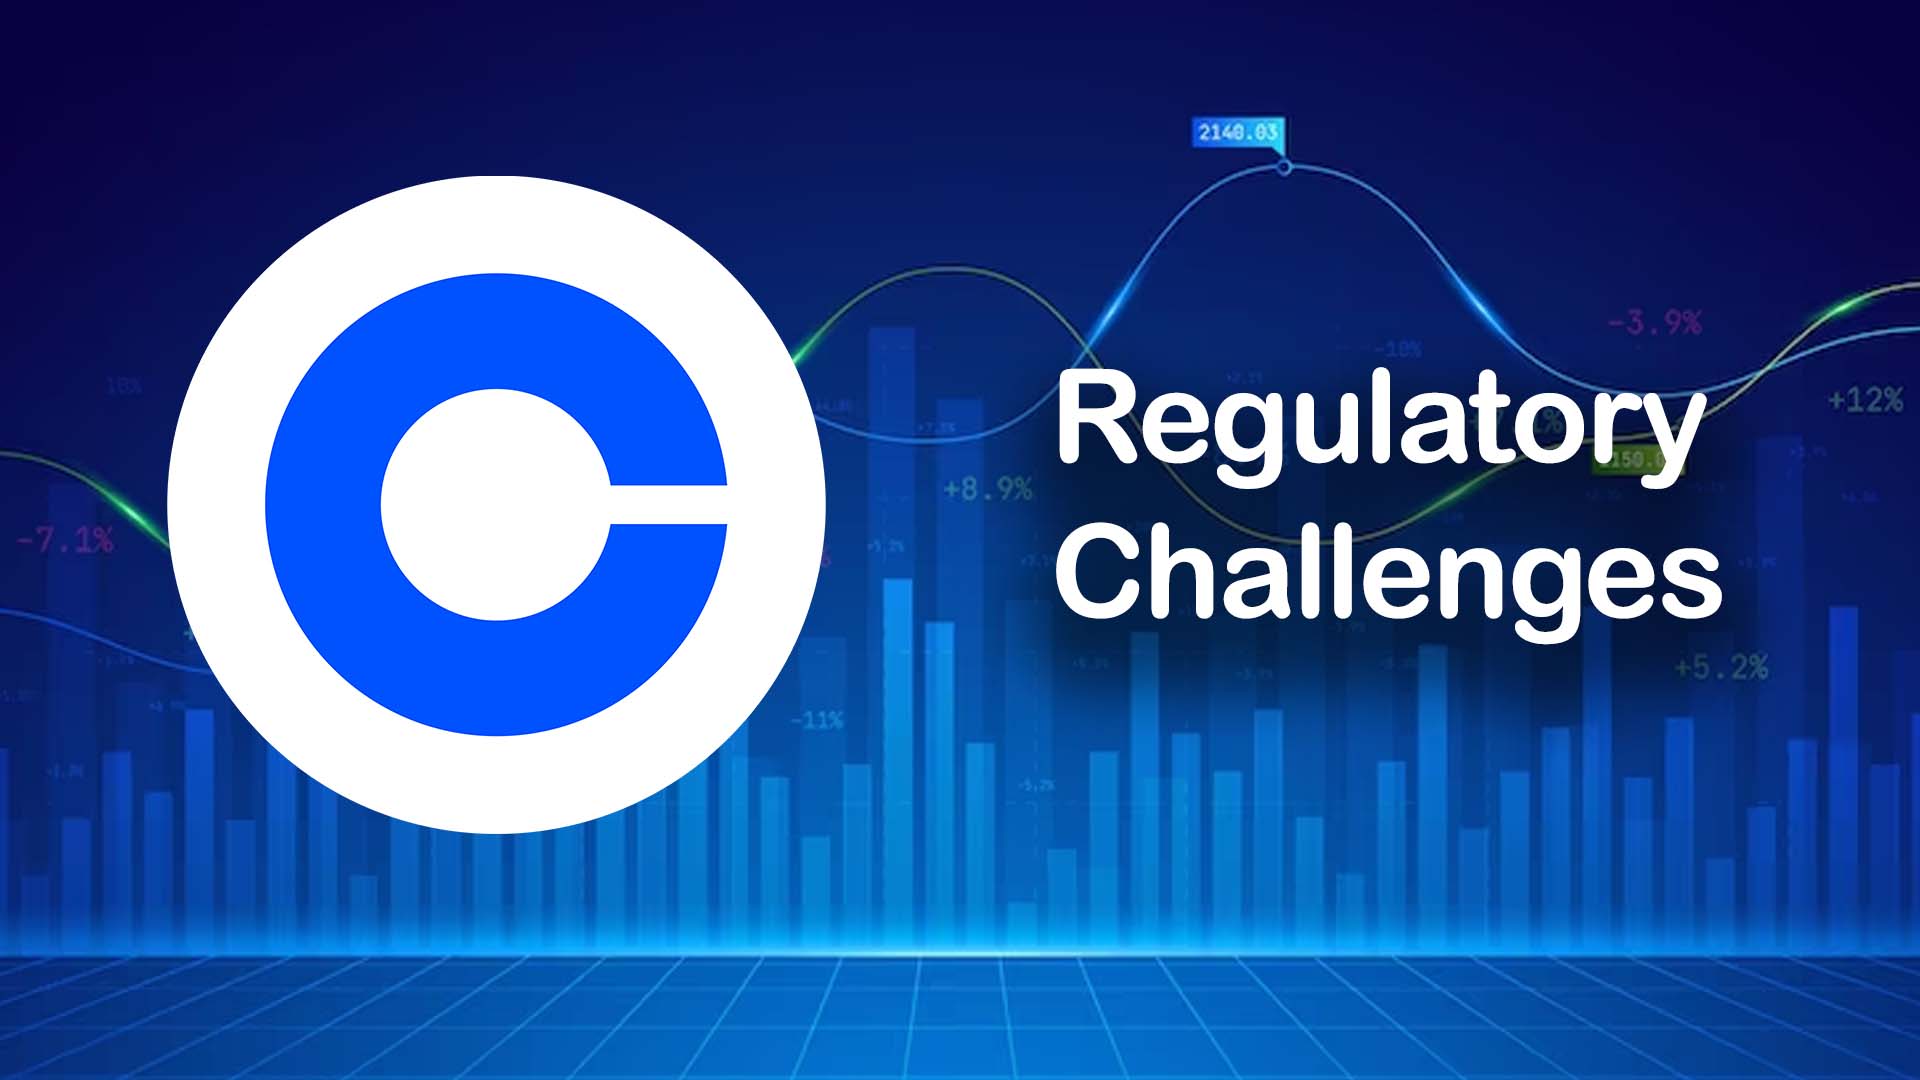 Coinbase Global Faces Regulatory Challenges, Leading to Downgrade